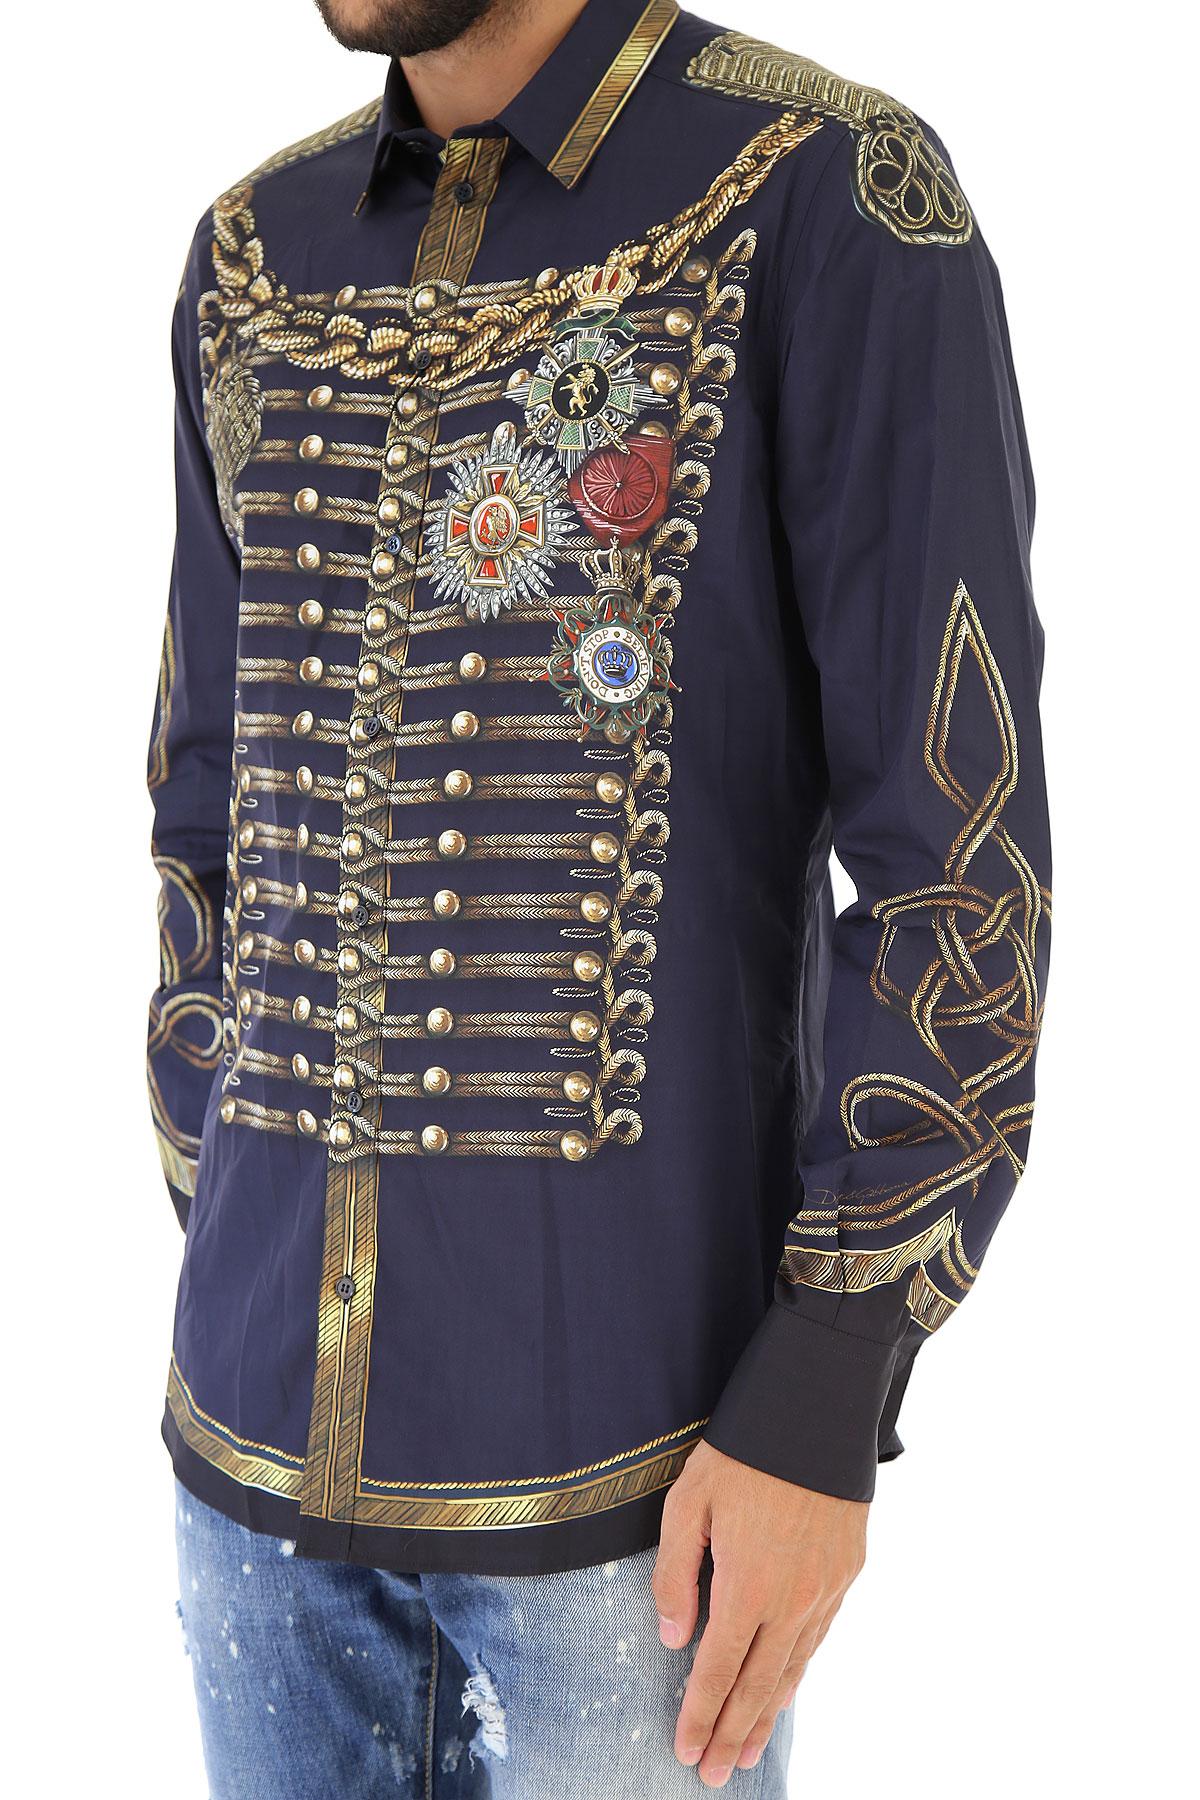 dolce and gabbana military jacket